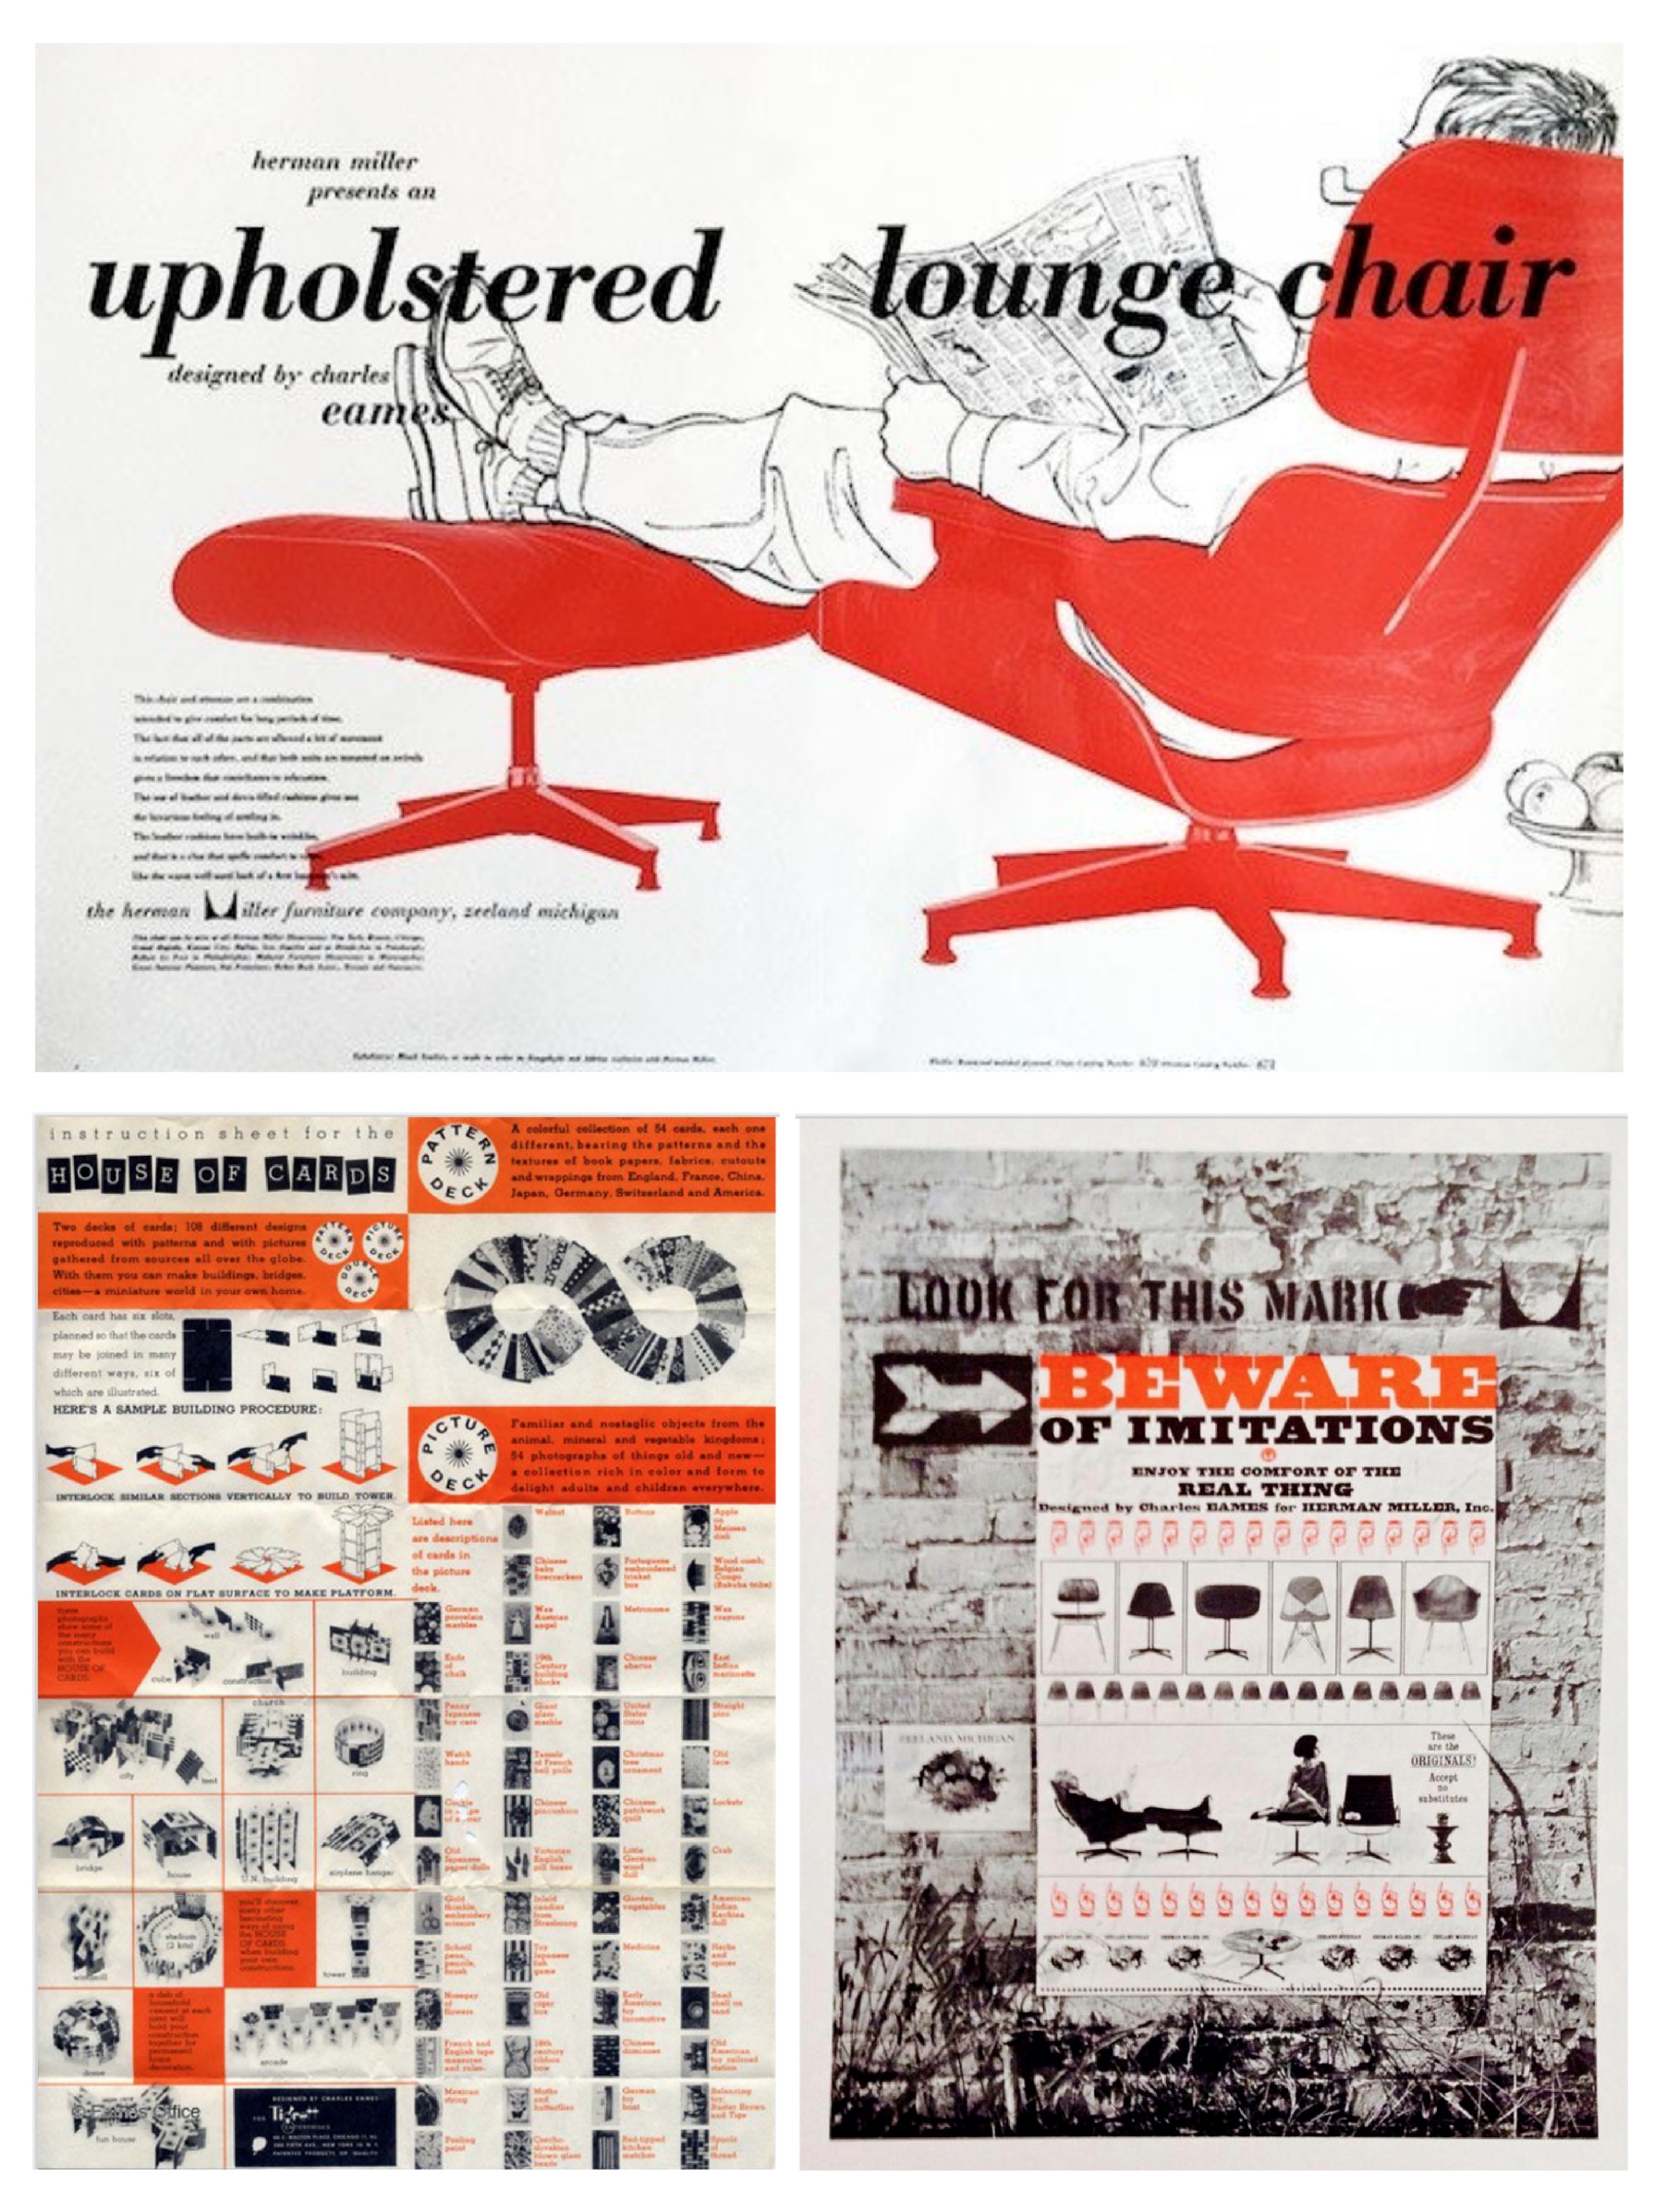 work for eames